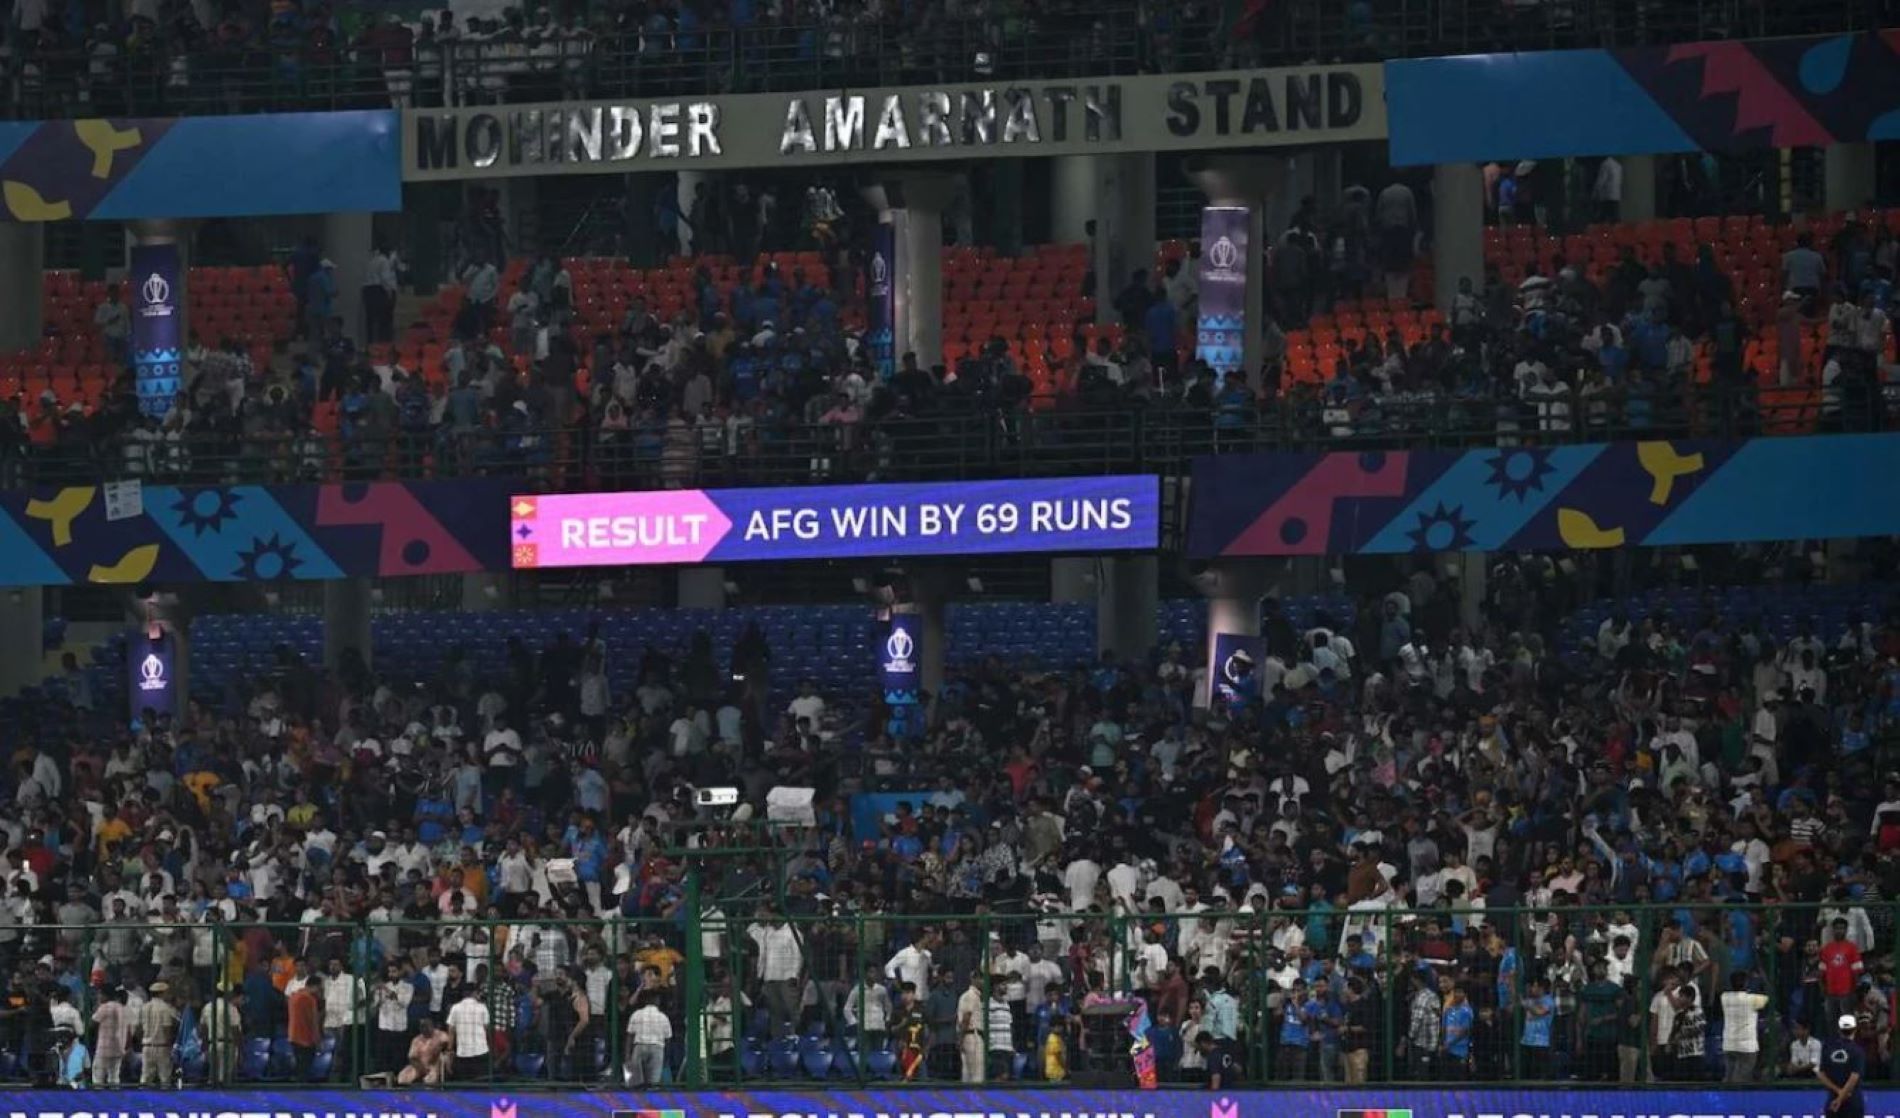 The Delhi crowd was treated to a stunning game on a Super Sunday.